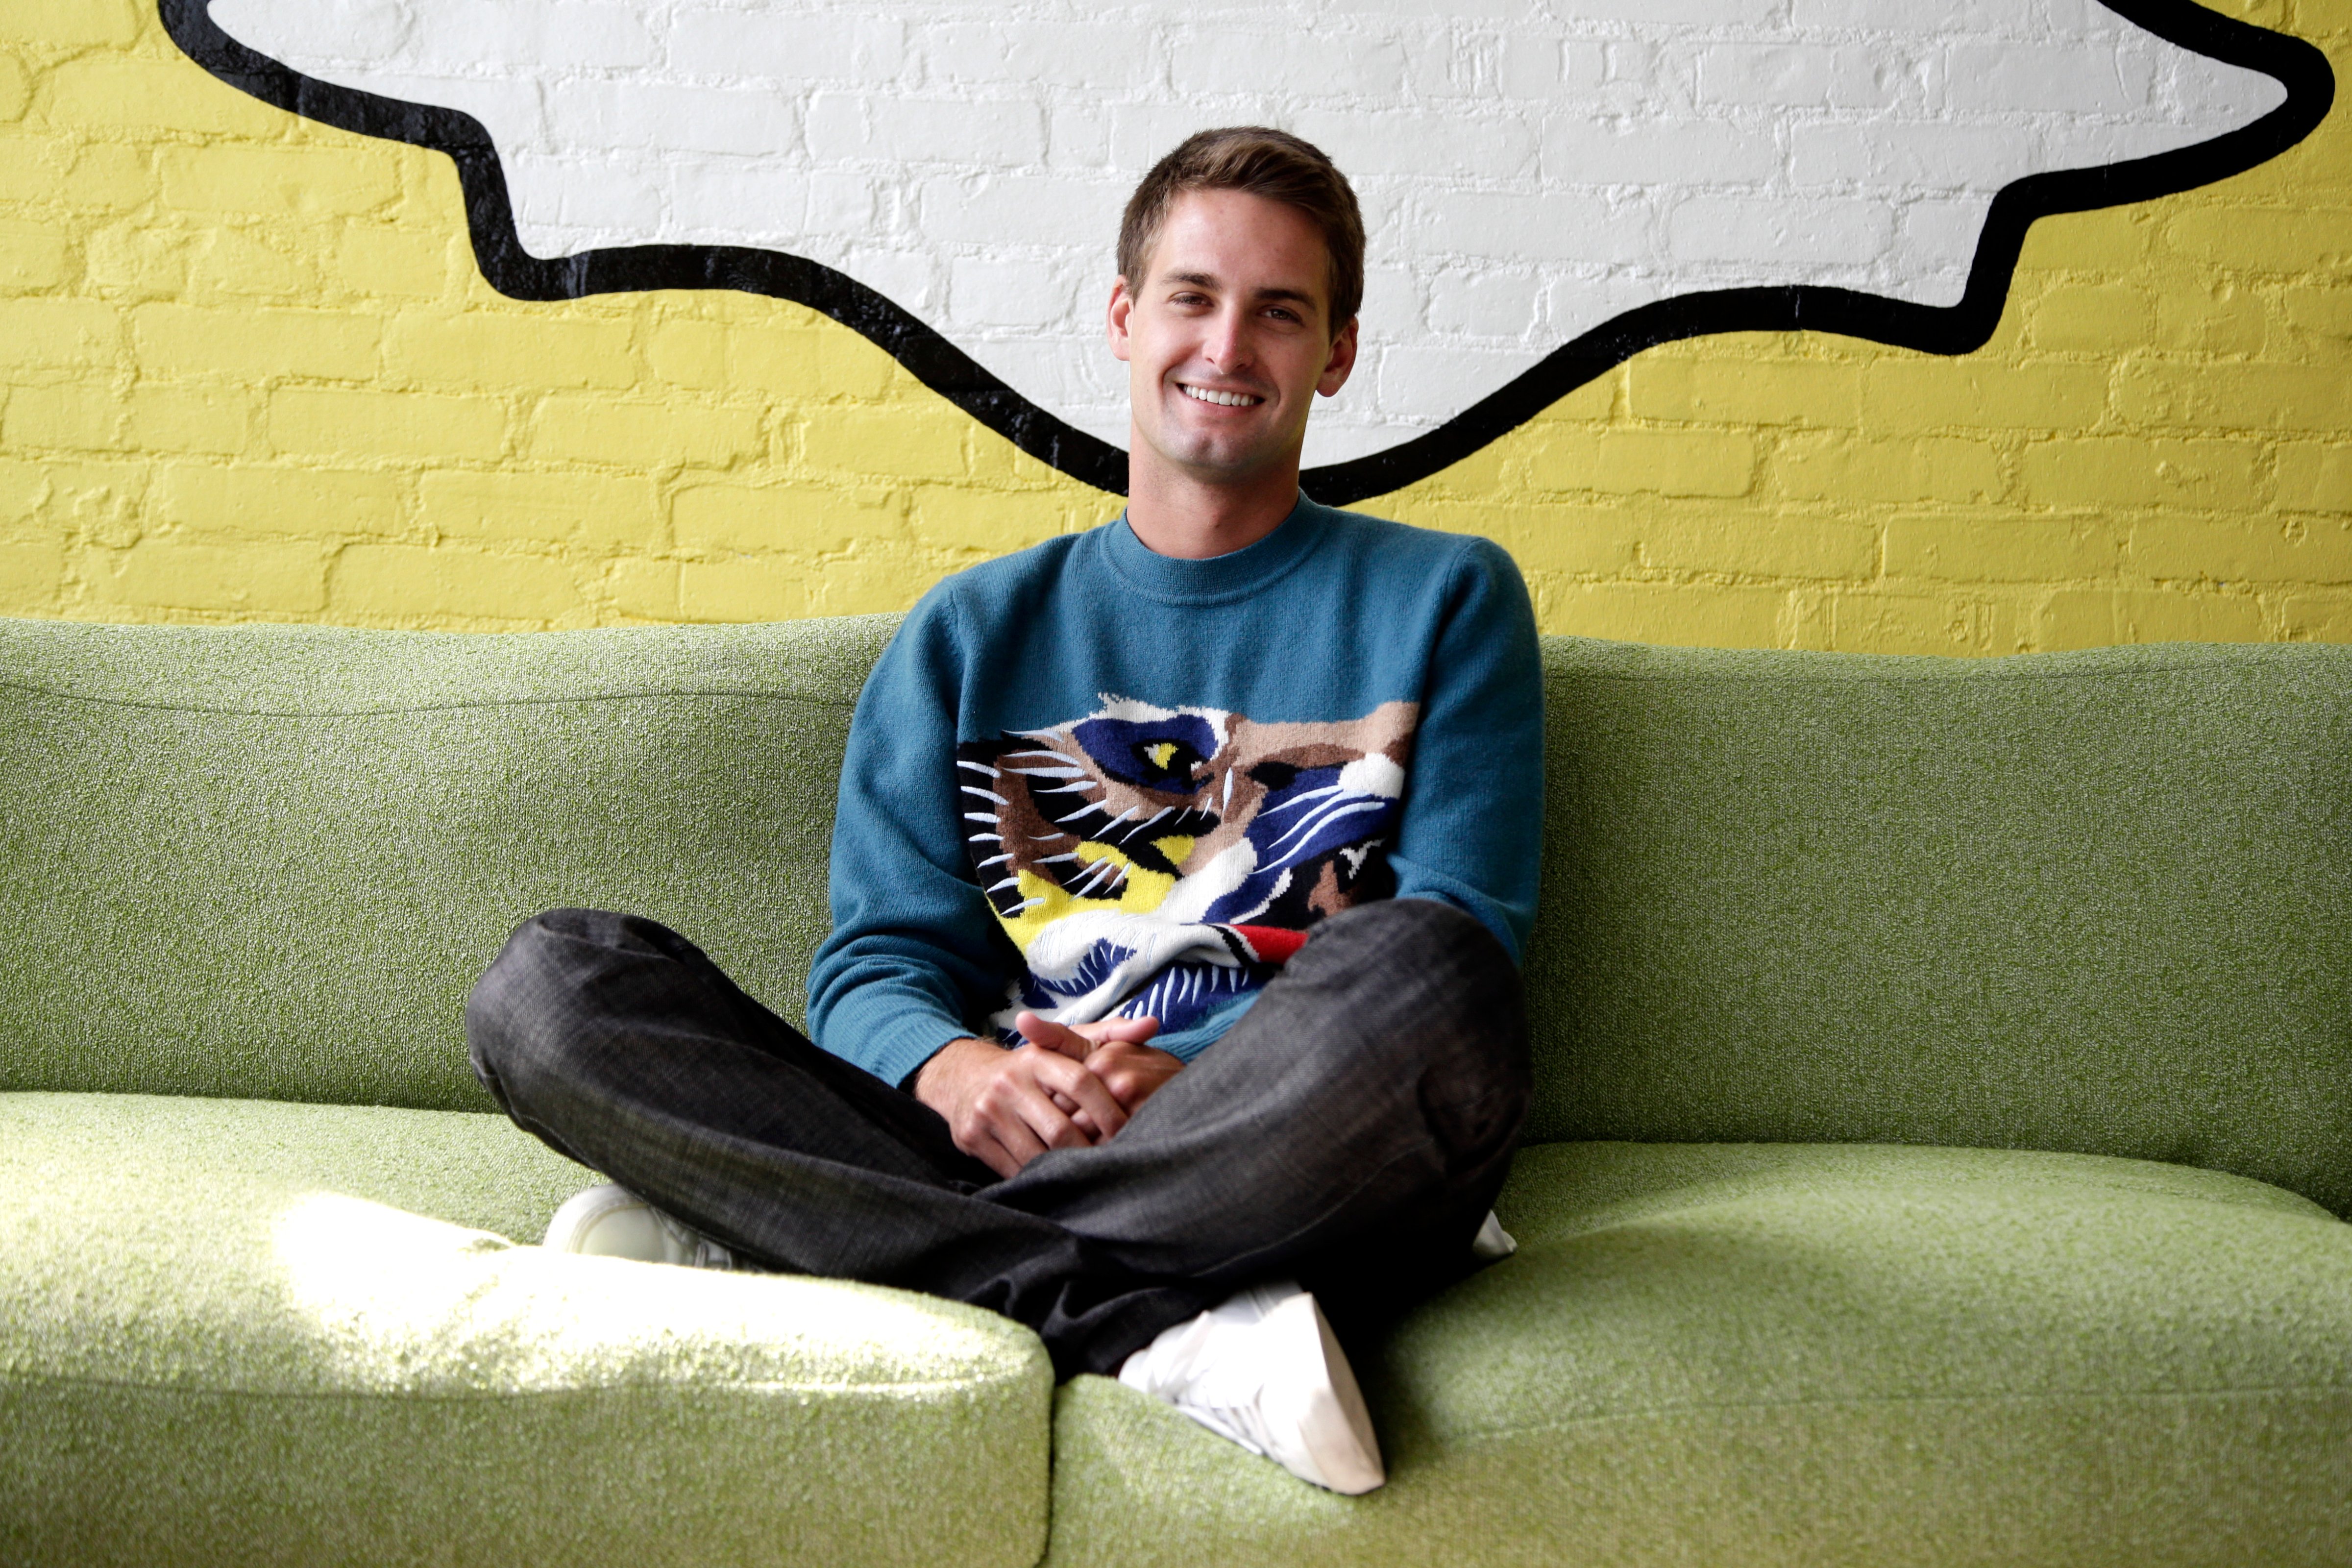 Snapchat CEO Evan Spiegel poses for photos, in Los Angeles, Oct. 24, 2013. (Jae C. Hong—AP)